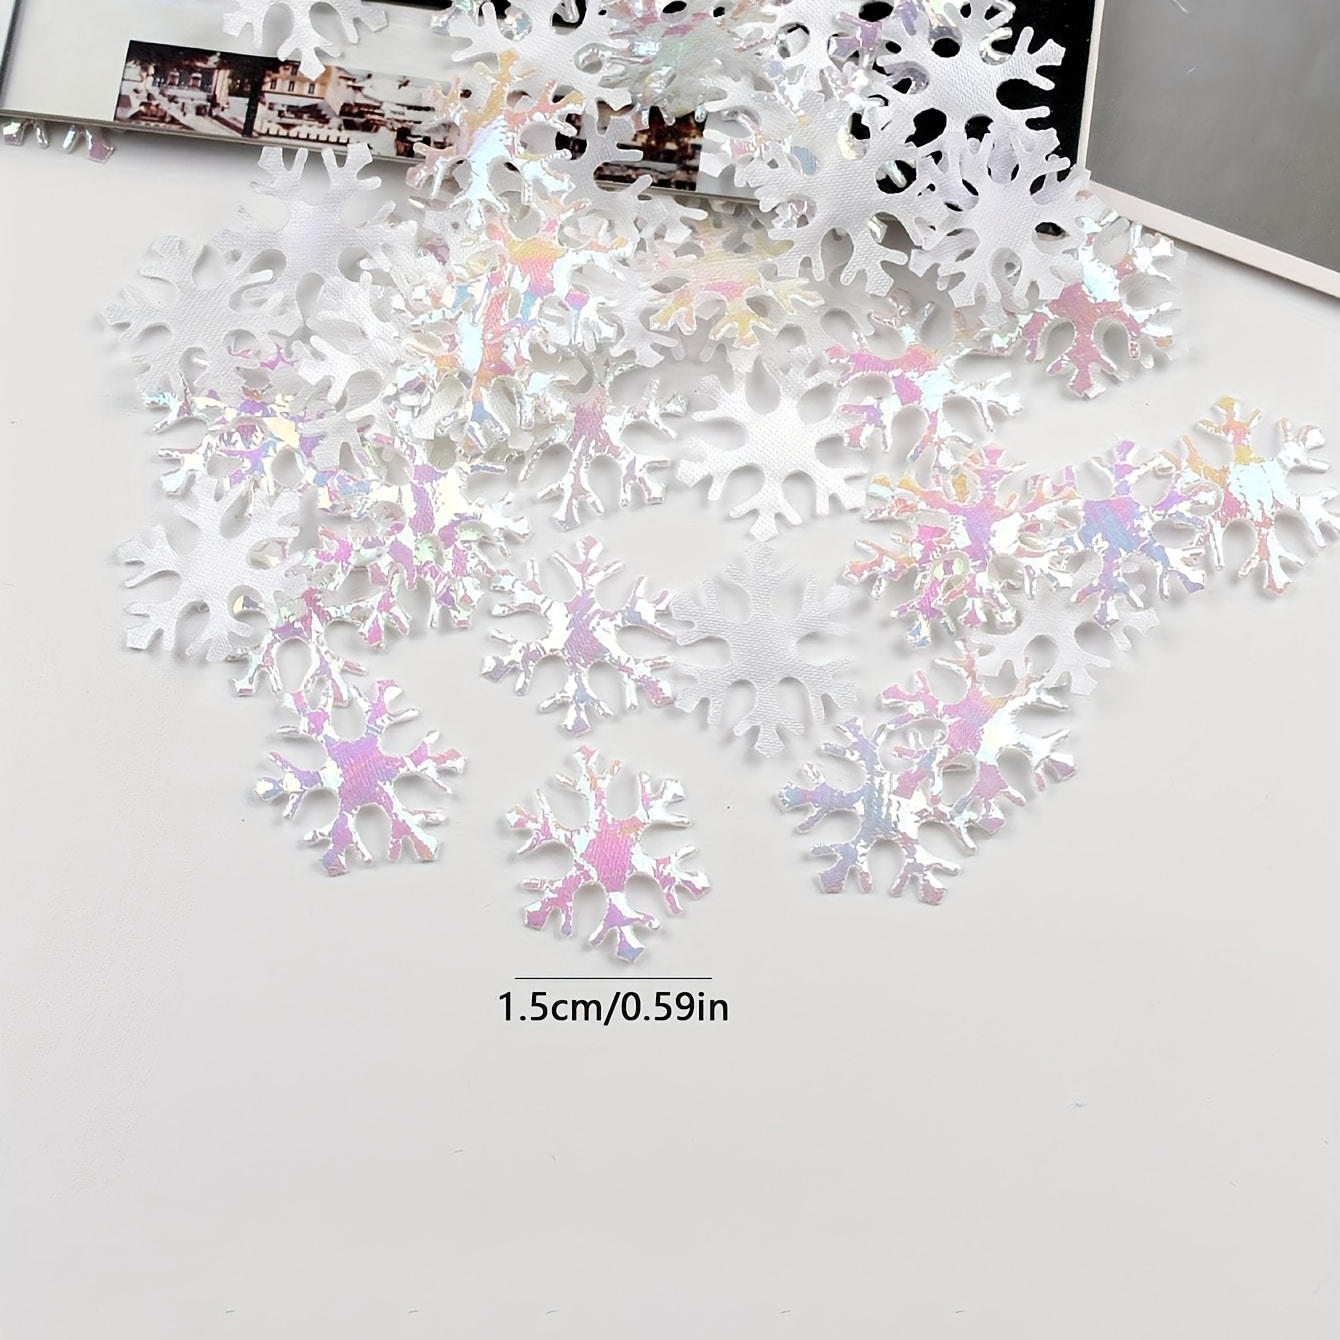  Didiseaon 700pcs Christmas Snowflakes Party Decorations Winter  Confetti Snowflake Confetti for Tables Glitter Snowflakes Wedding Stickers  Christmas Tree Decorations Funny Confetti Metal Mini : Home & Kitchen